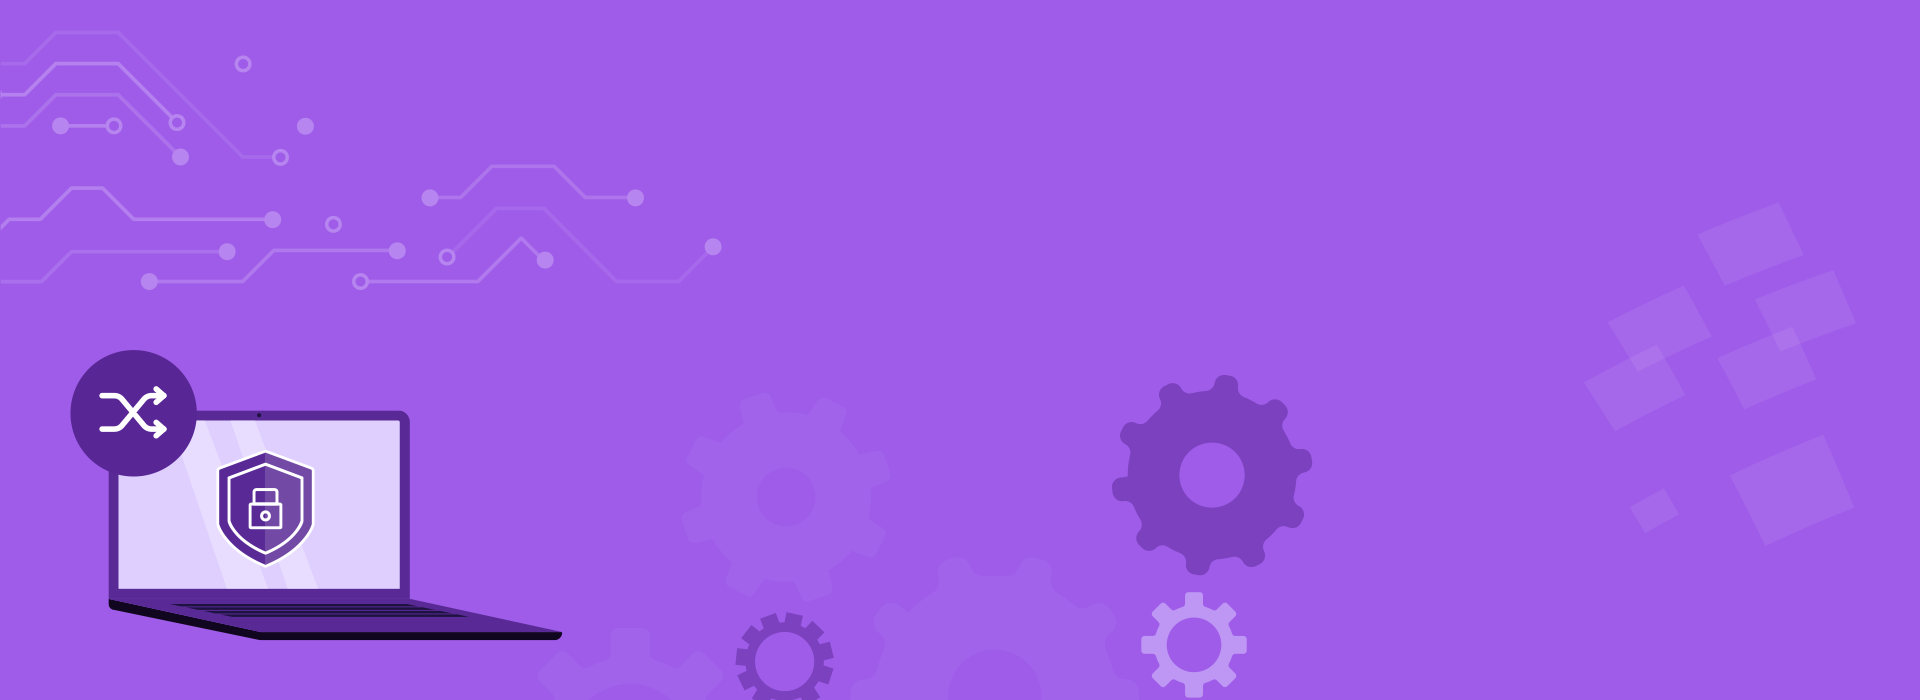 Purple background image with gears, laptop, and illustrations